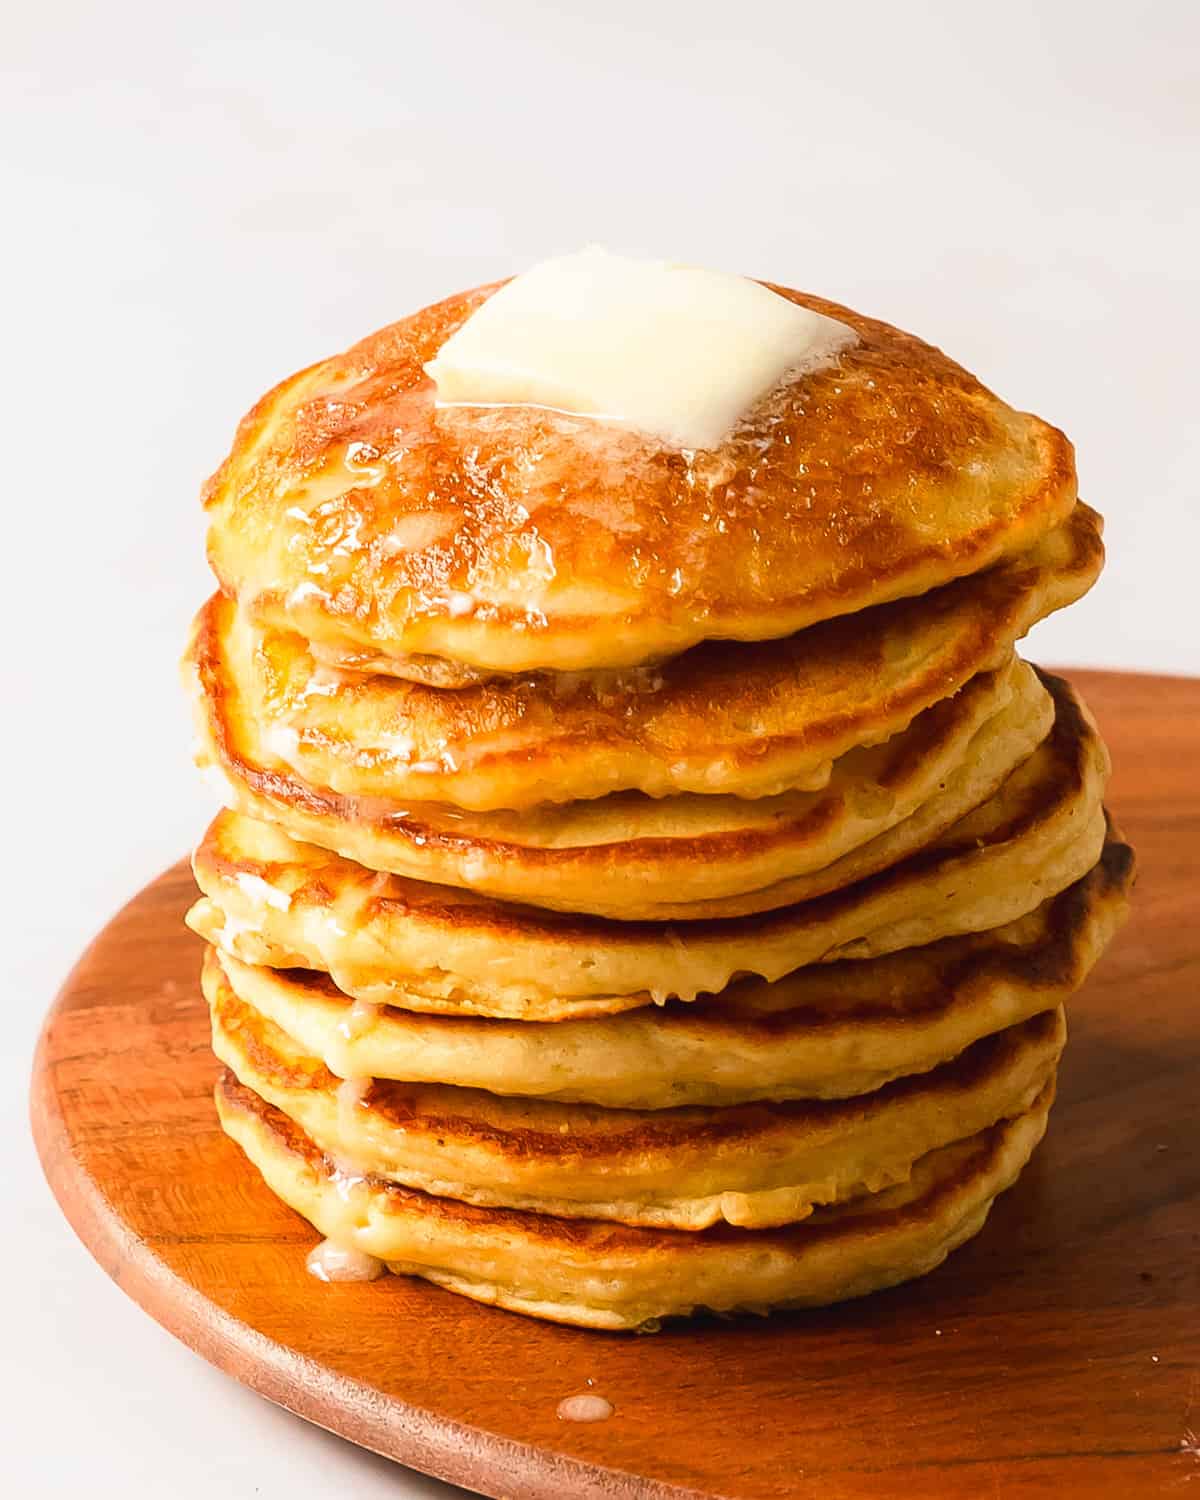 Sweet cream pancakes are rich, thick and decadent pancakes made with heavy cream. These melt in your mouth pancakes with heavy cream are quick and easy to make using basic pantry ingredients. This recipe for whip cream pancakes make the best pancakes for a cozy and indulgent breakfast everyone will love.